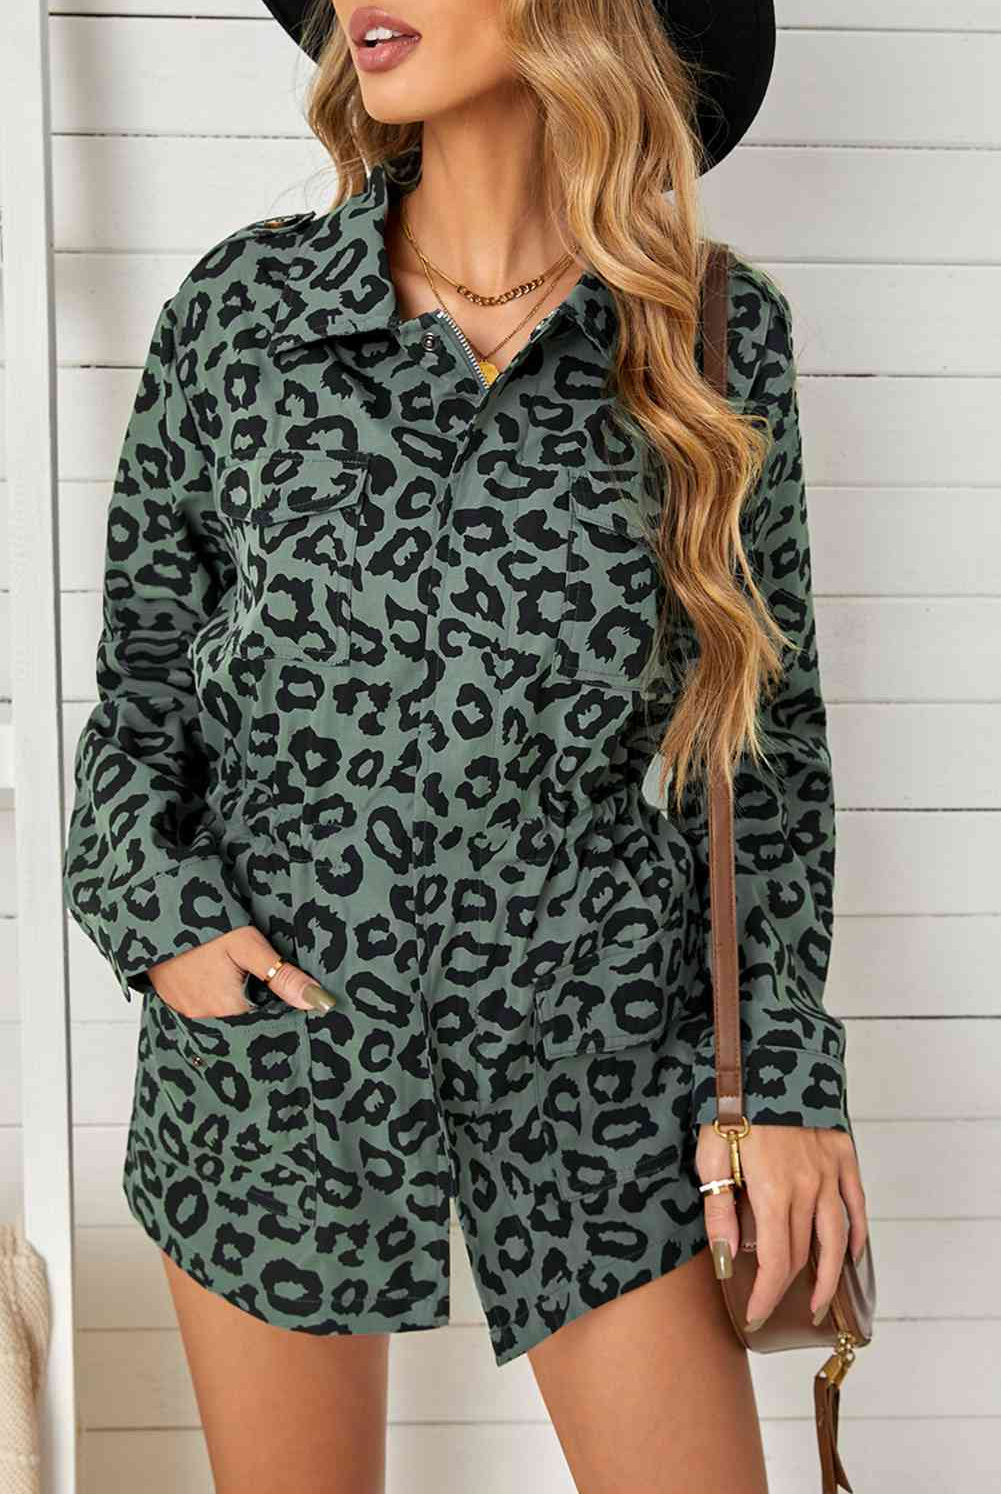 Rosy Brown Double Take Leopard Drawstring Waist Jacket with Pockets Trends